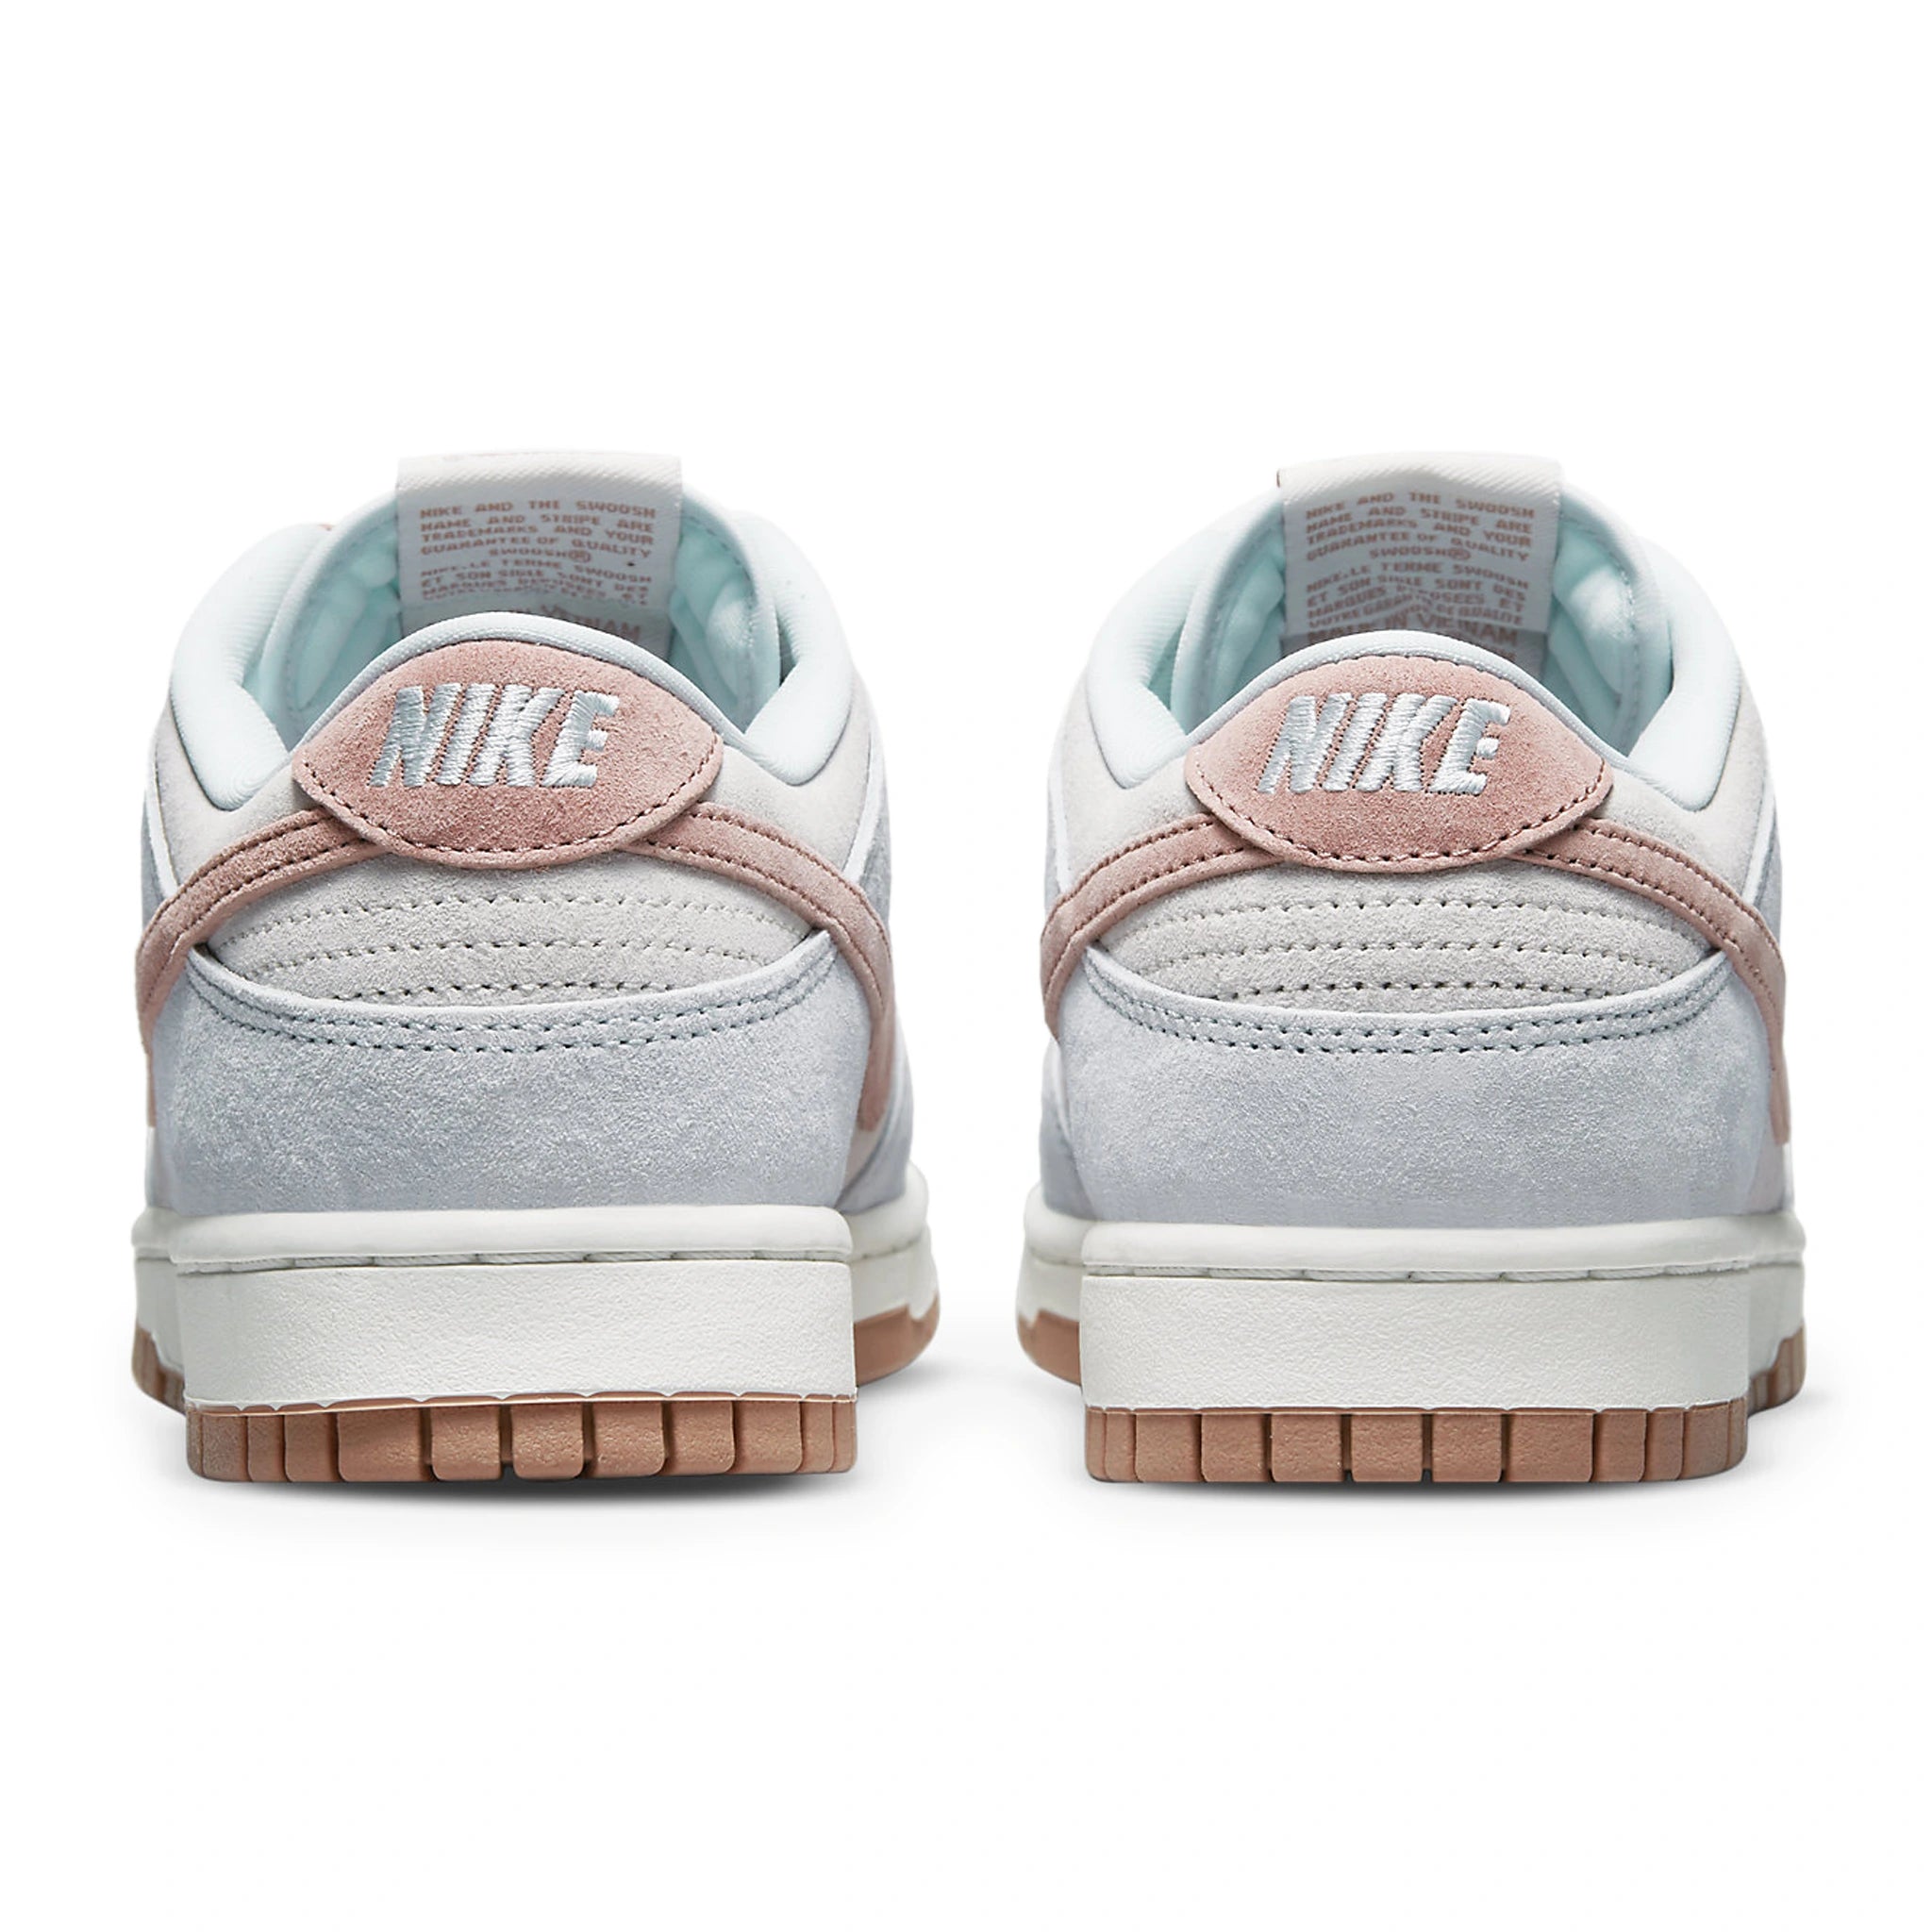 Back view of Nike Dunk Low Fossil Rose DH7577-001